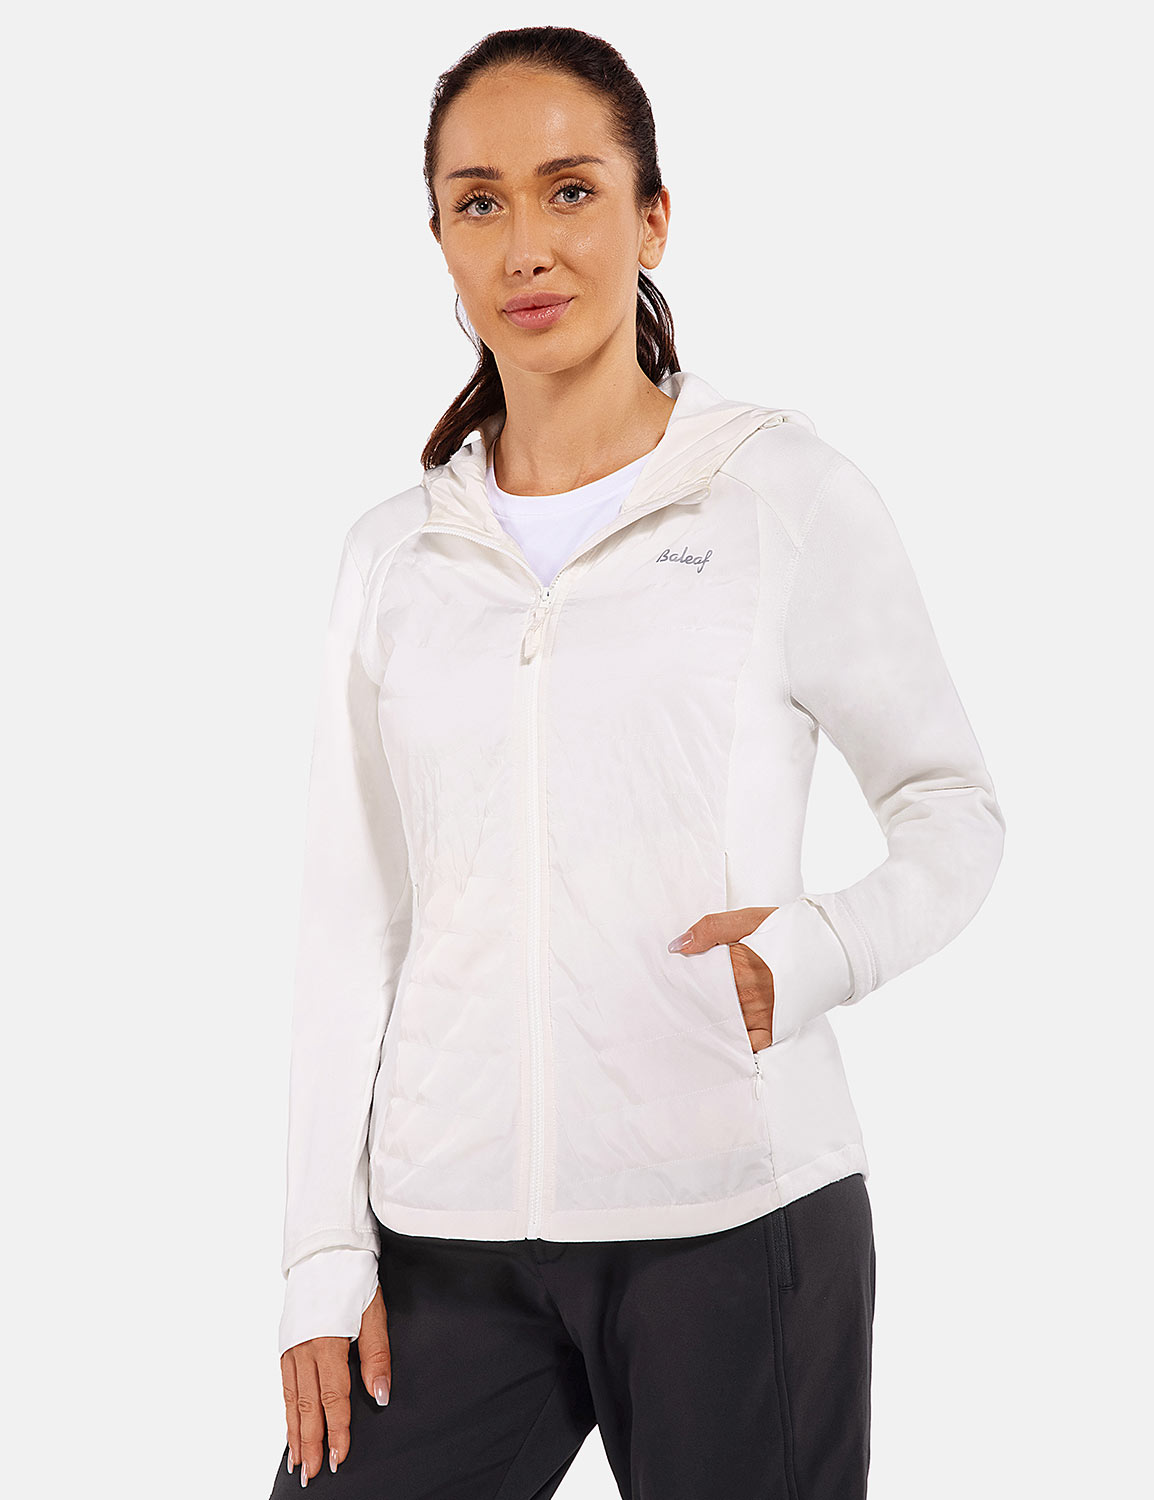 Baleaf Women's Triumph Thermal Water-Resistant Hooded Jacket cga030 Star White Front